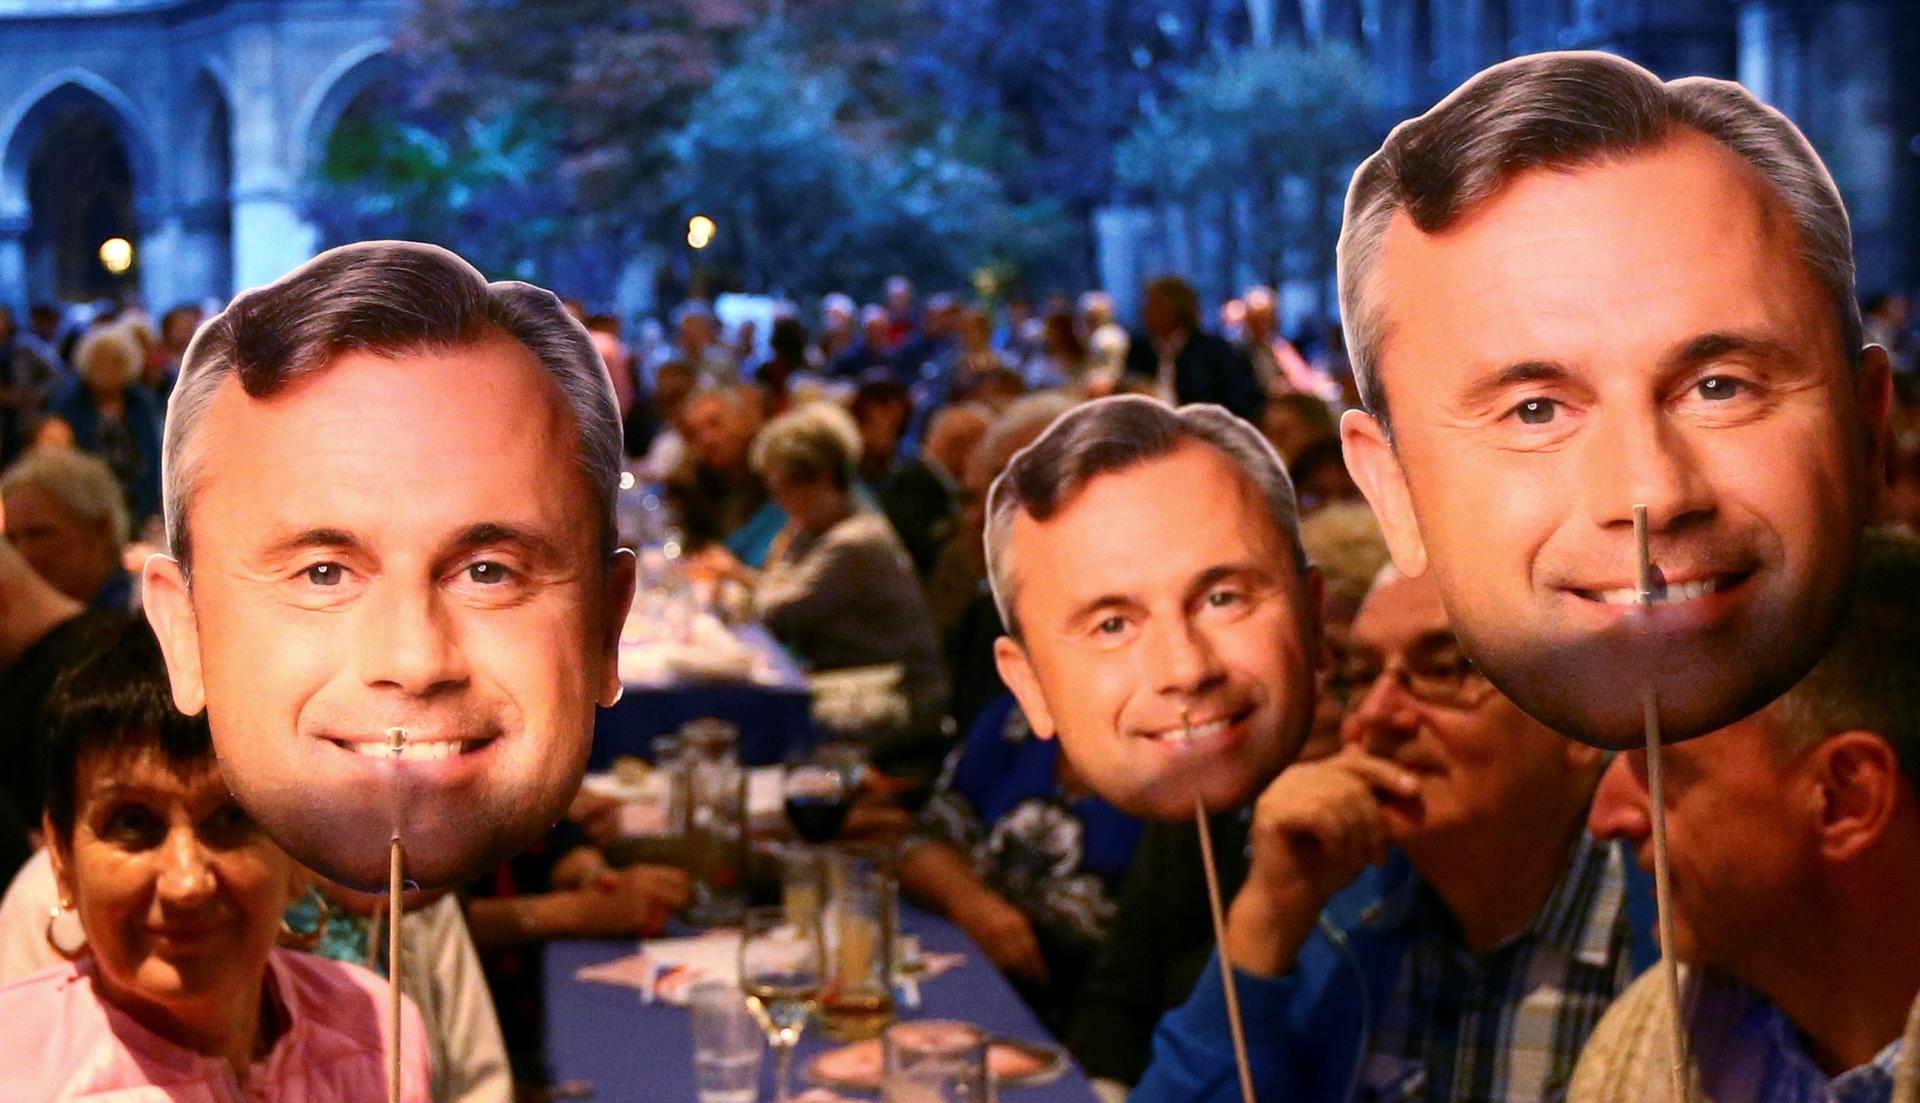 Supporters of Austrian far right Freedom Party (FPOe) presidential candidate Norbert Hofer hold images of his face in Vienna, Austria.